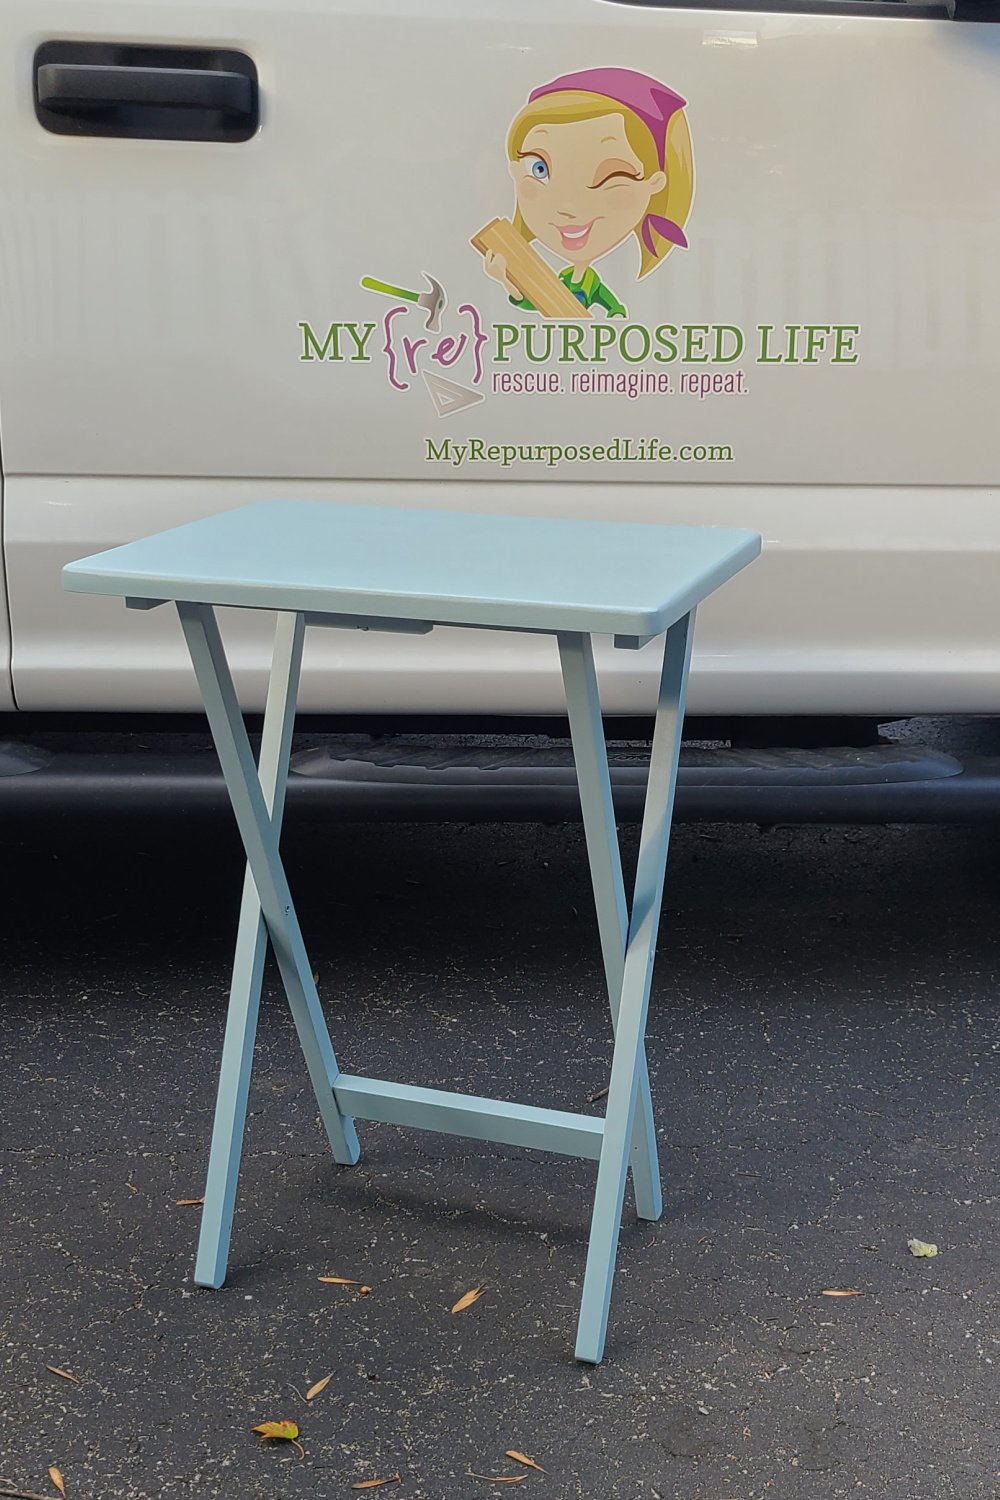 How to give an outdated folding tray table the perfect makeover. Tips for cleaning painting and more. Don't forget the underside of the table, little things like that make the difference. #MyRepurposedLife #furniture #makeover #htp #allinonepaint via @repurposedlife